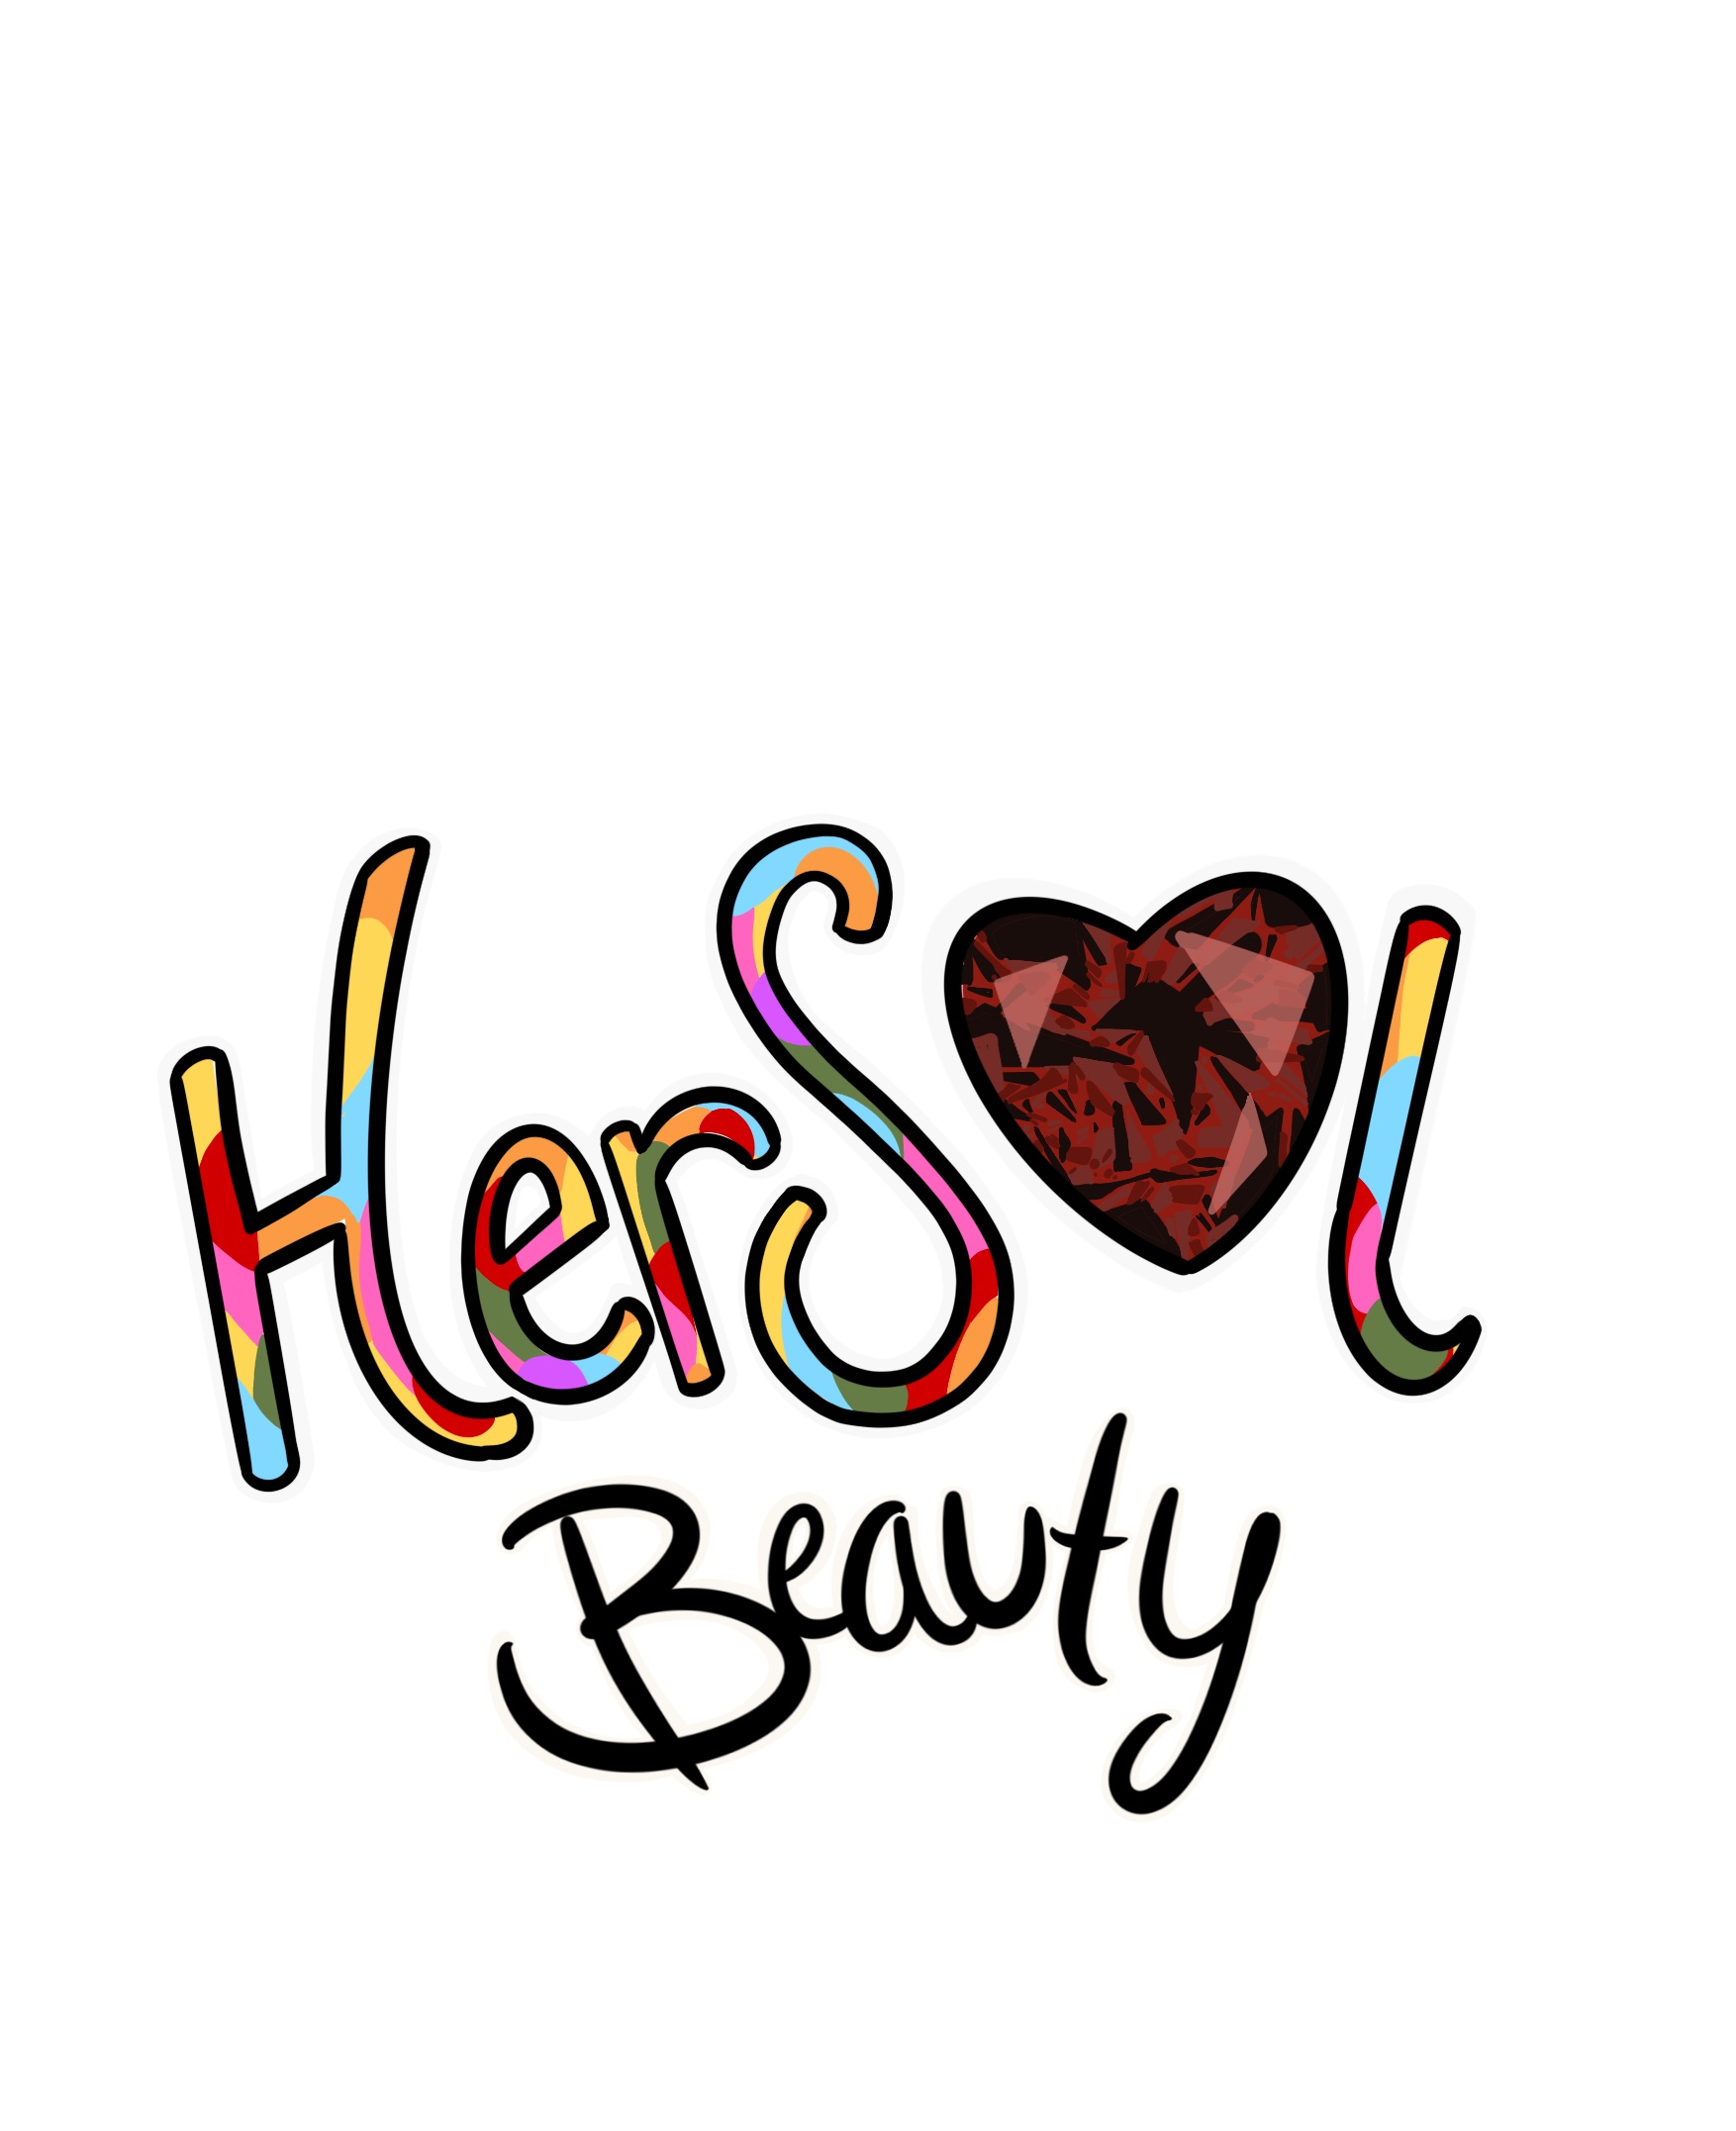 Log for HerSol Beauty feature the words in bright ethnic colors.